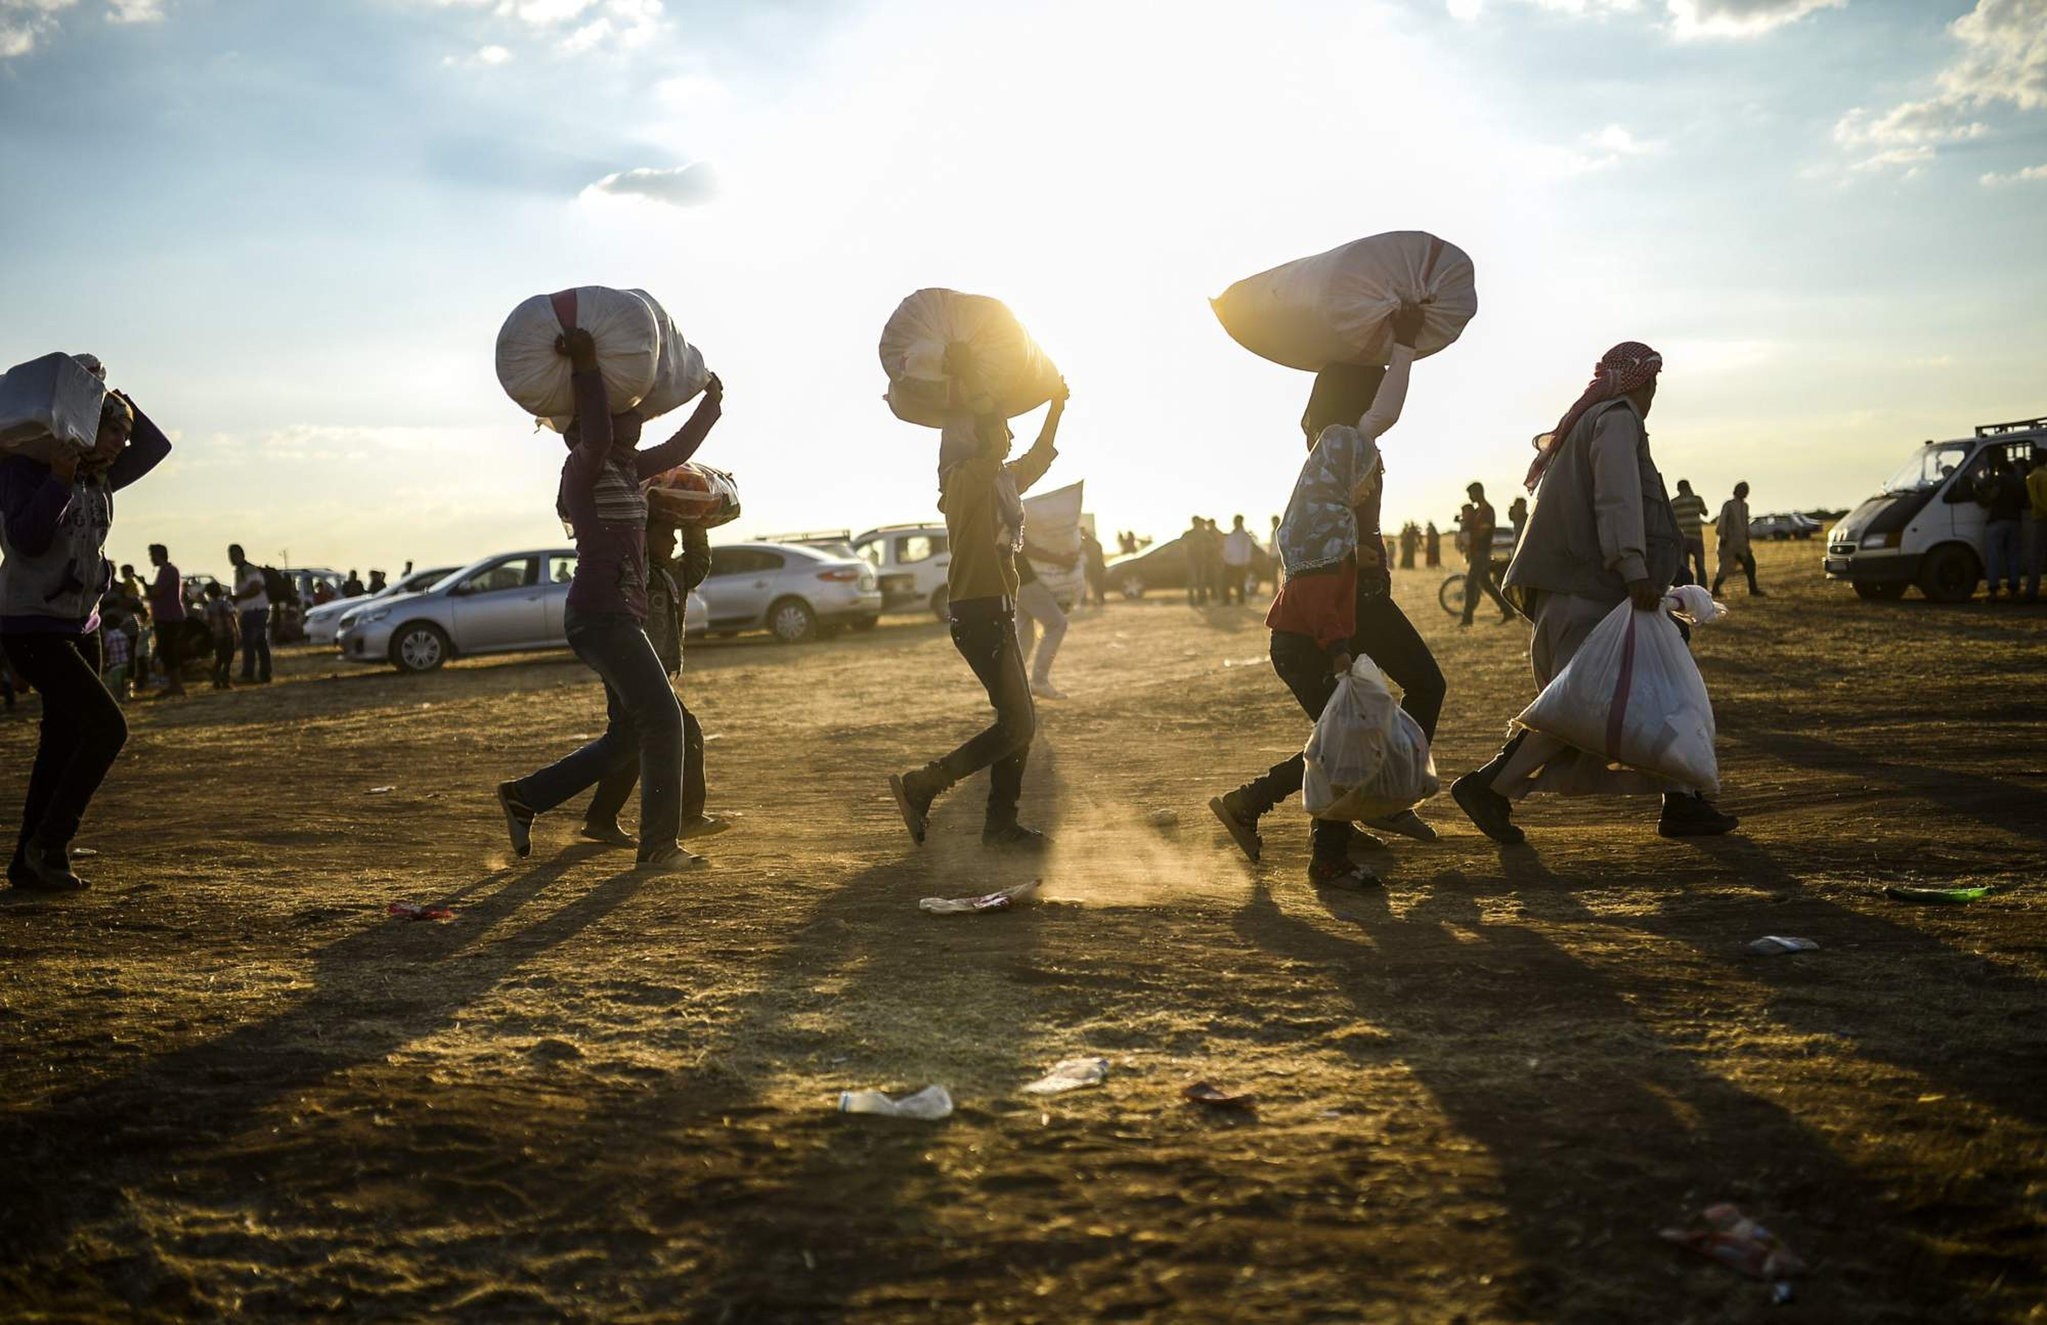 Syrian Kurds carry belongings as they cross the border between Syria and Turkey near the southeastern town of Suruu00e7 in u015eanlu0131urfa province, on September 20, 2014.